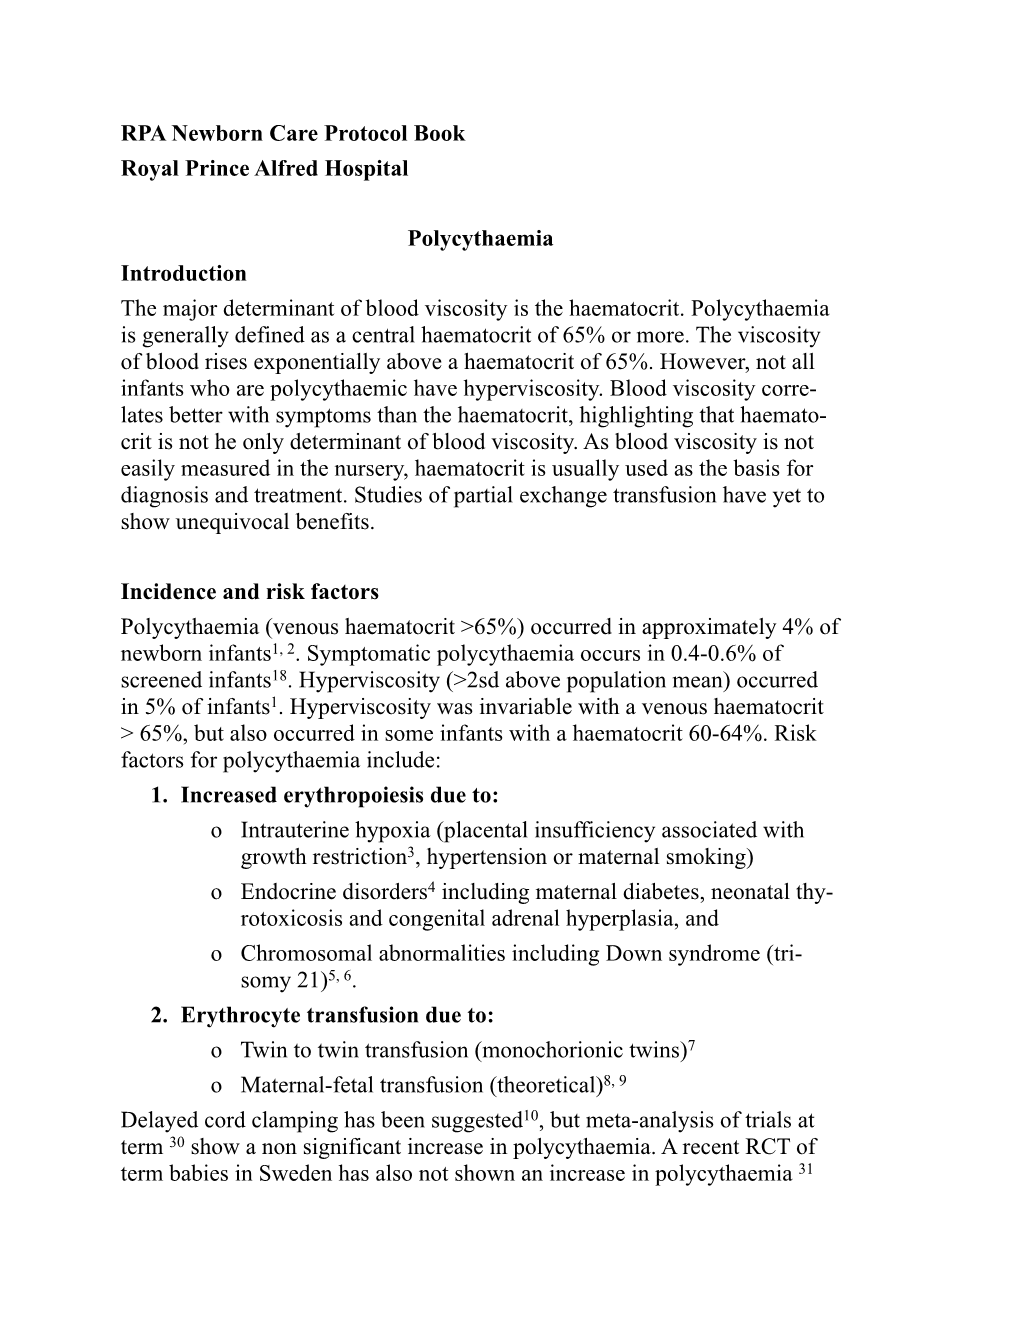 RPA Newborn Care Protocol Book Royal Prince Alfred Hospital Polycythaemia Introduction the Major Determinant of Blood Viscosity